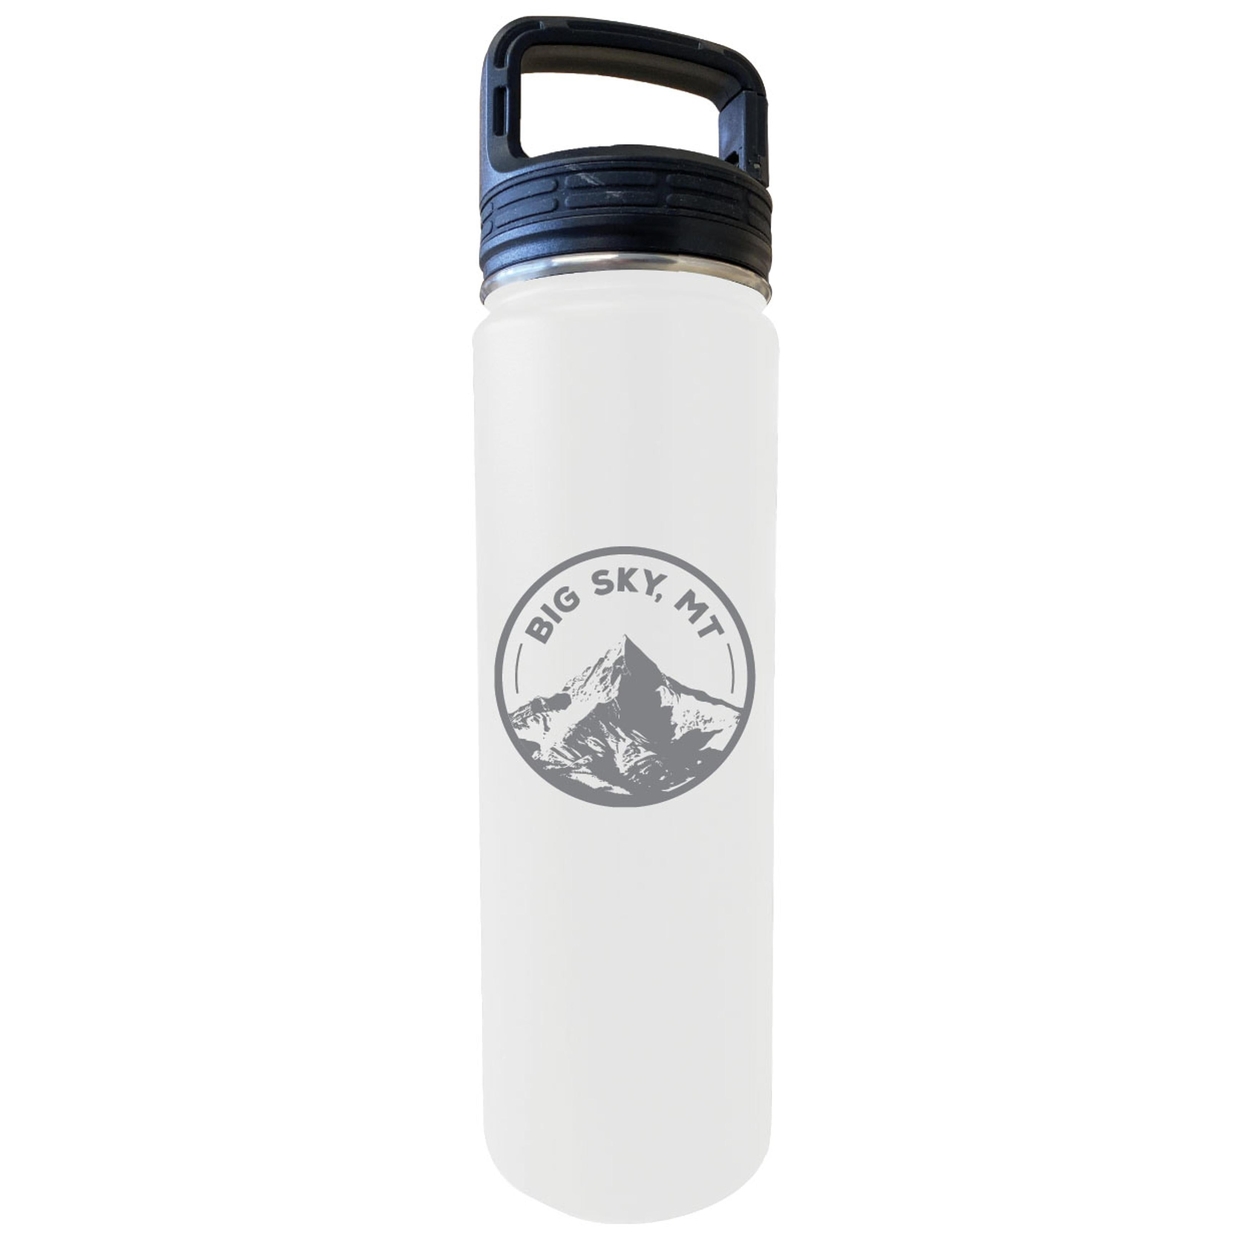 Big Sky Montana Souvenir 32 Oz Engraved Insulated Stainless Steel Tumbler - Black,,2-Pack